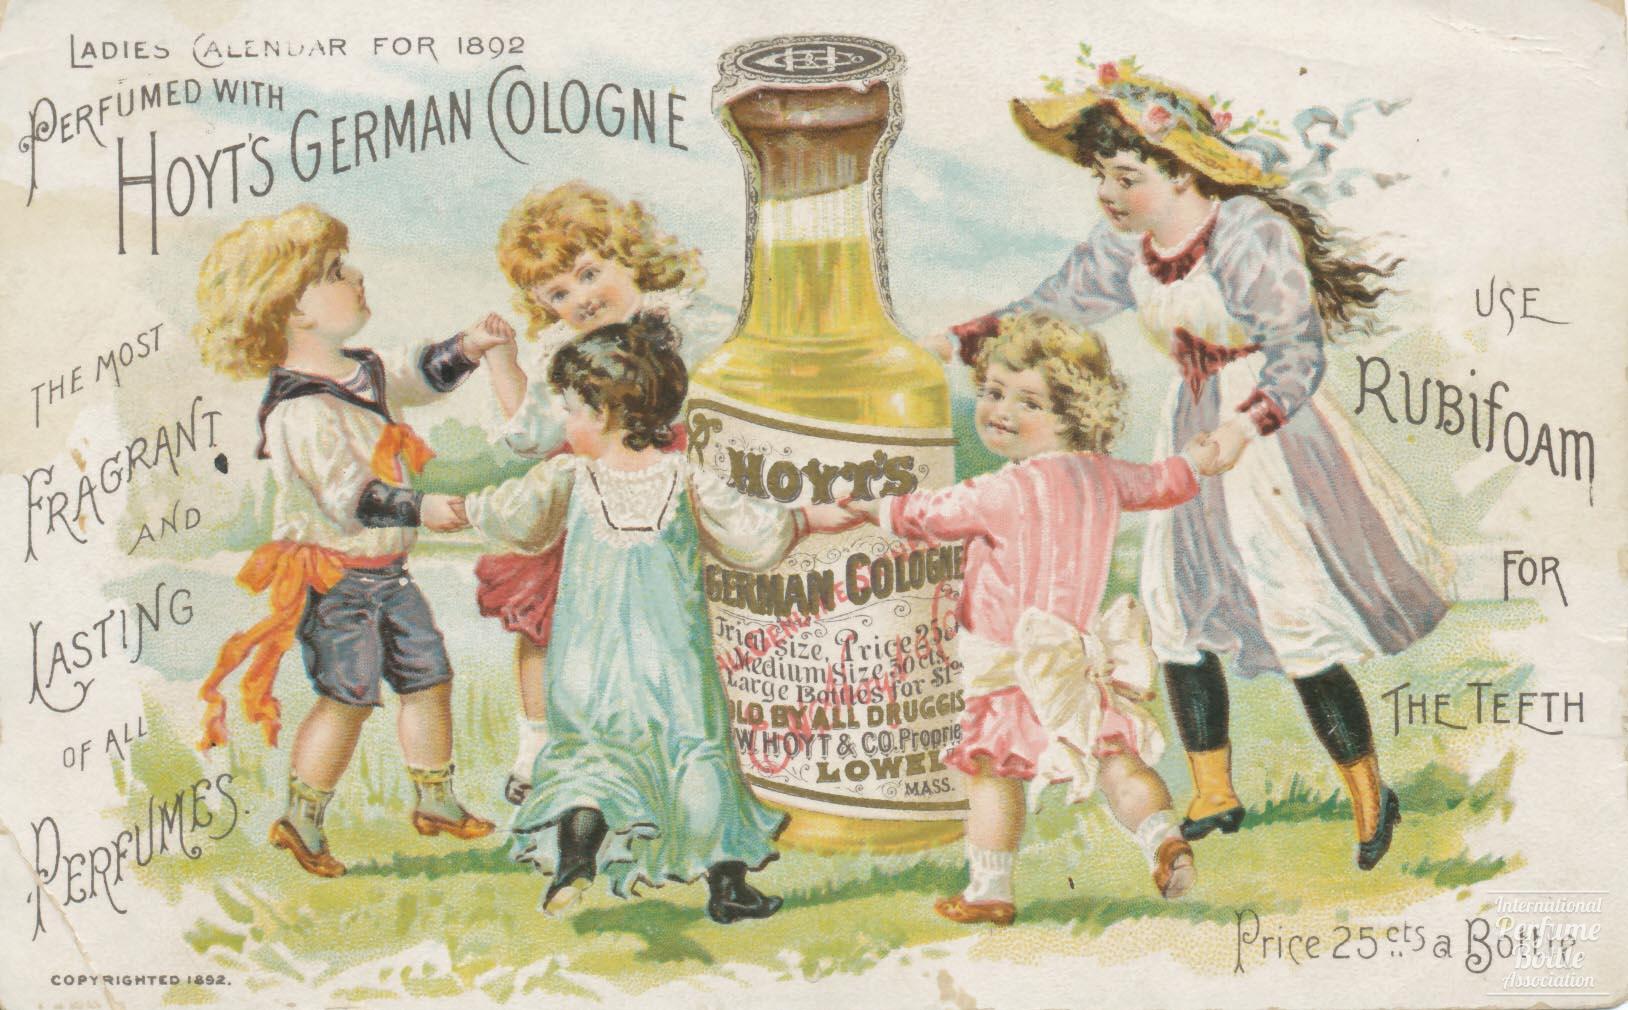 "Hoyt's German Cologne" Scent Card by E. W. Hoyt & Co. - 1892